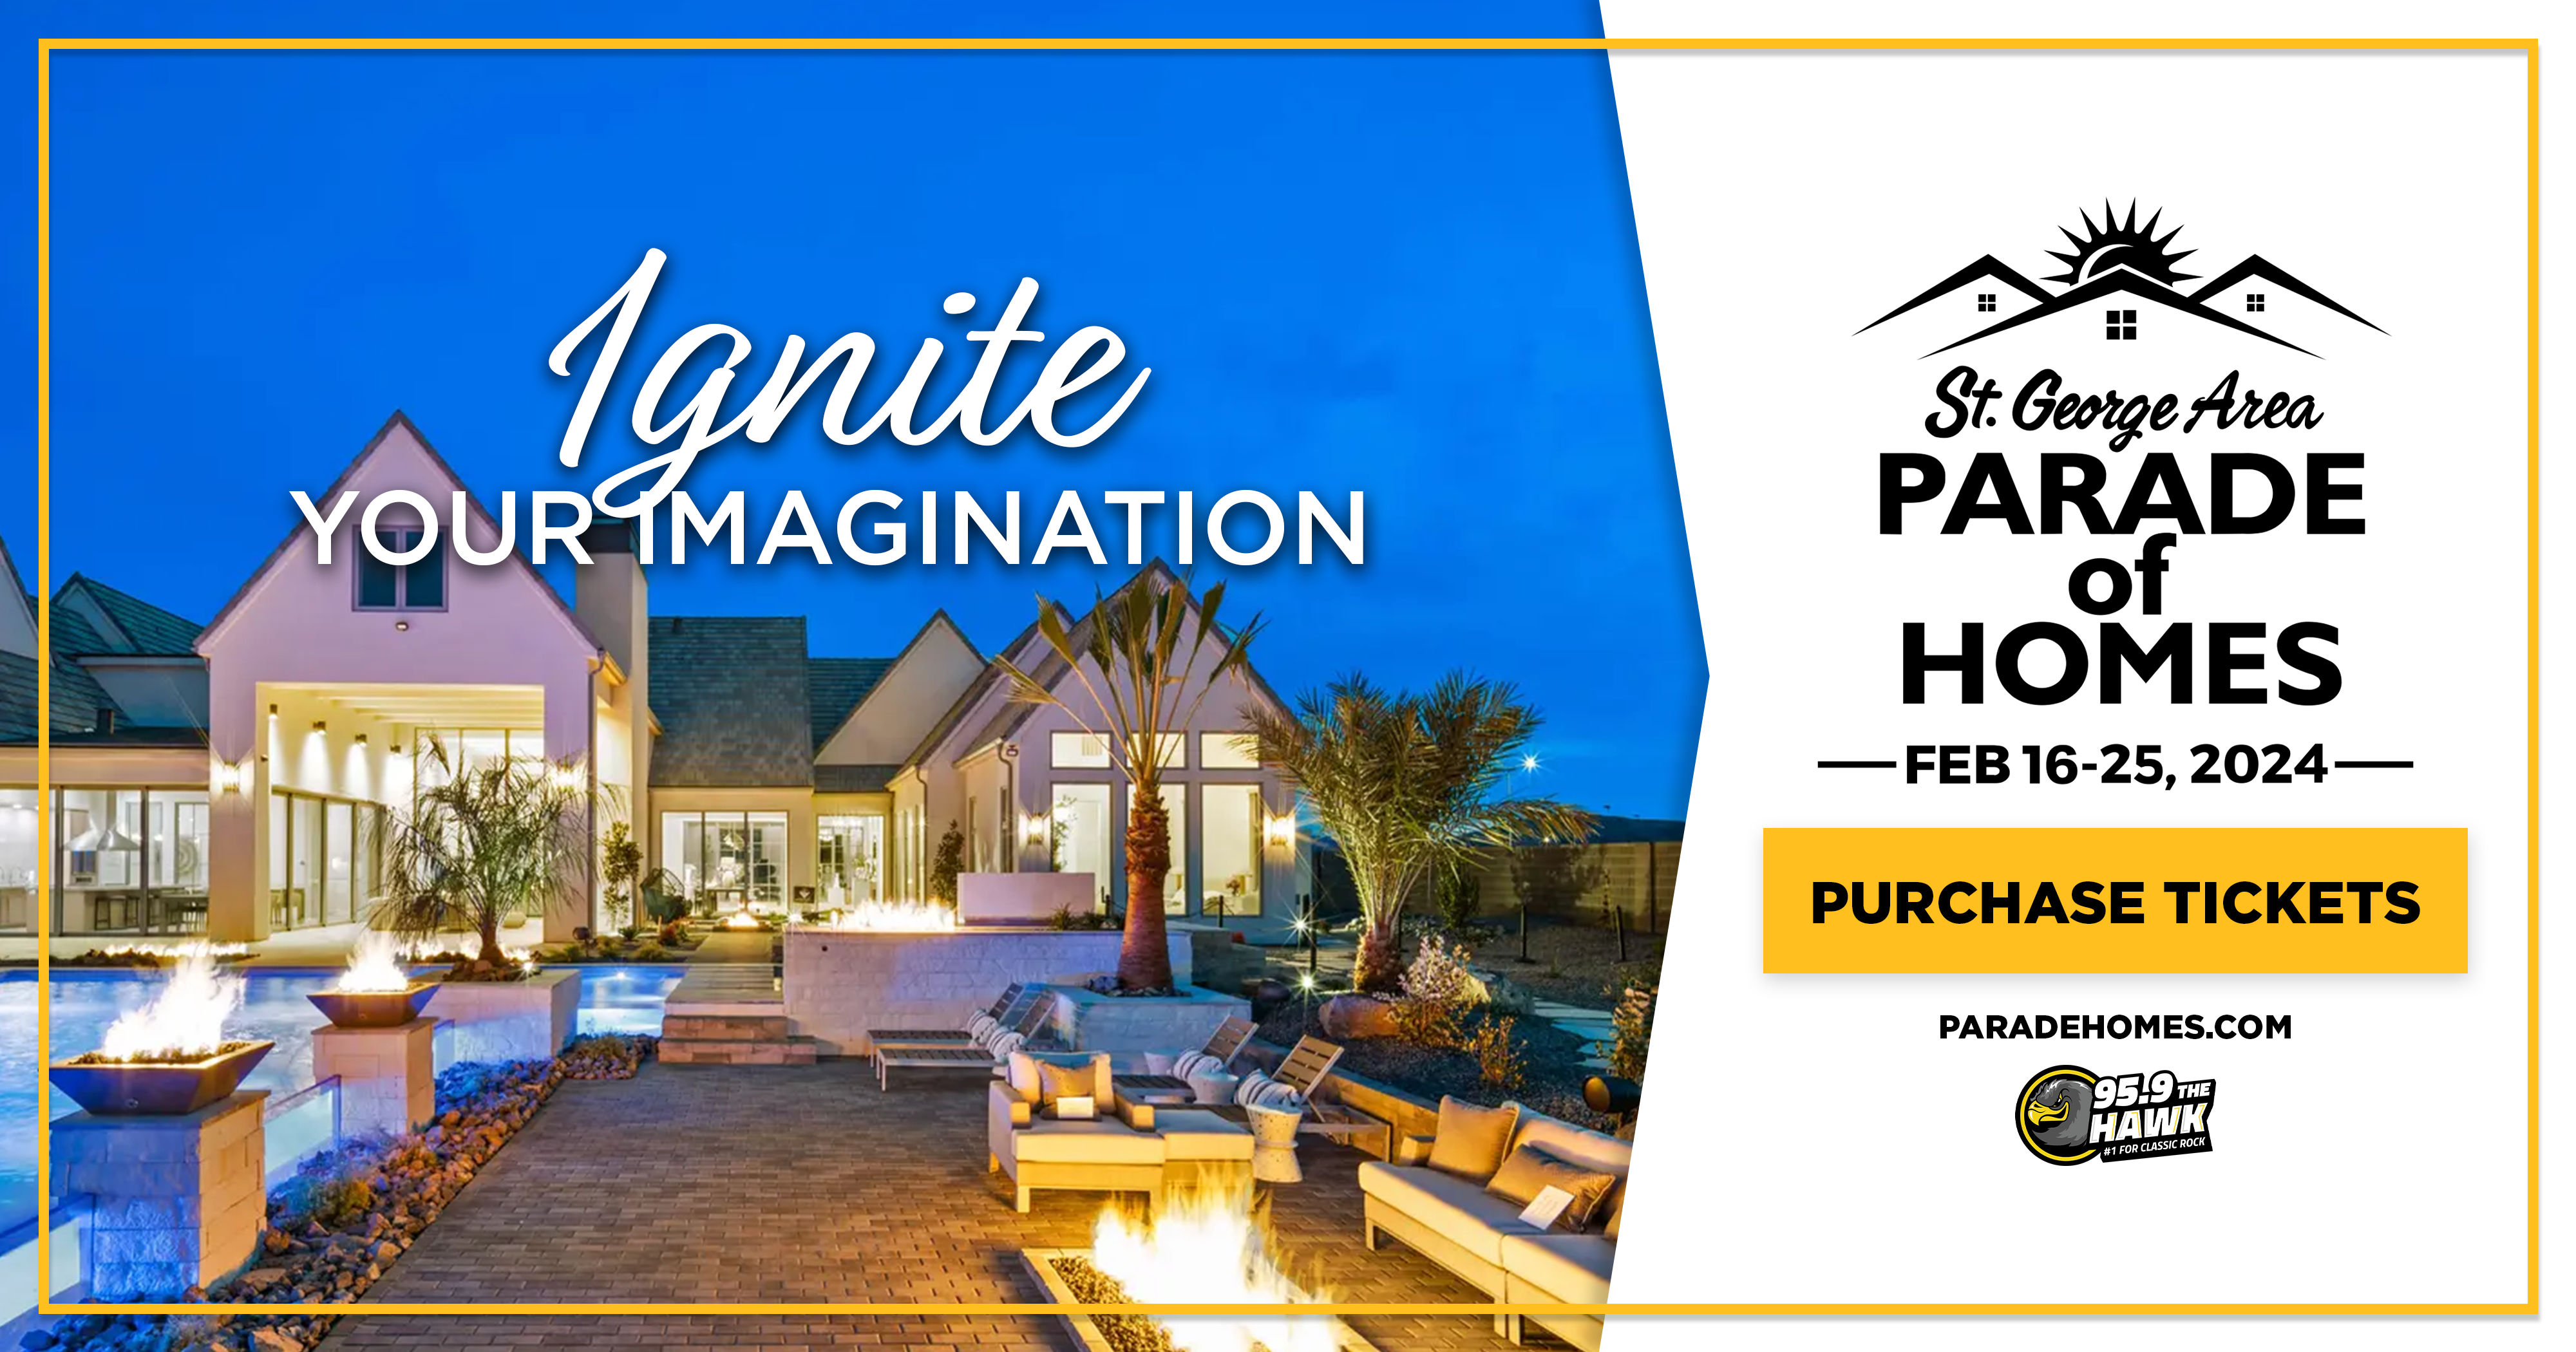 KZHK Parade of Homes | Purchase Tickets | Ignite Your Imagination